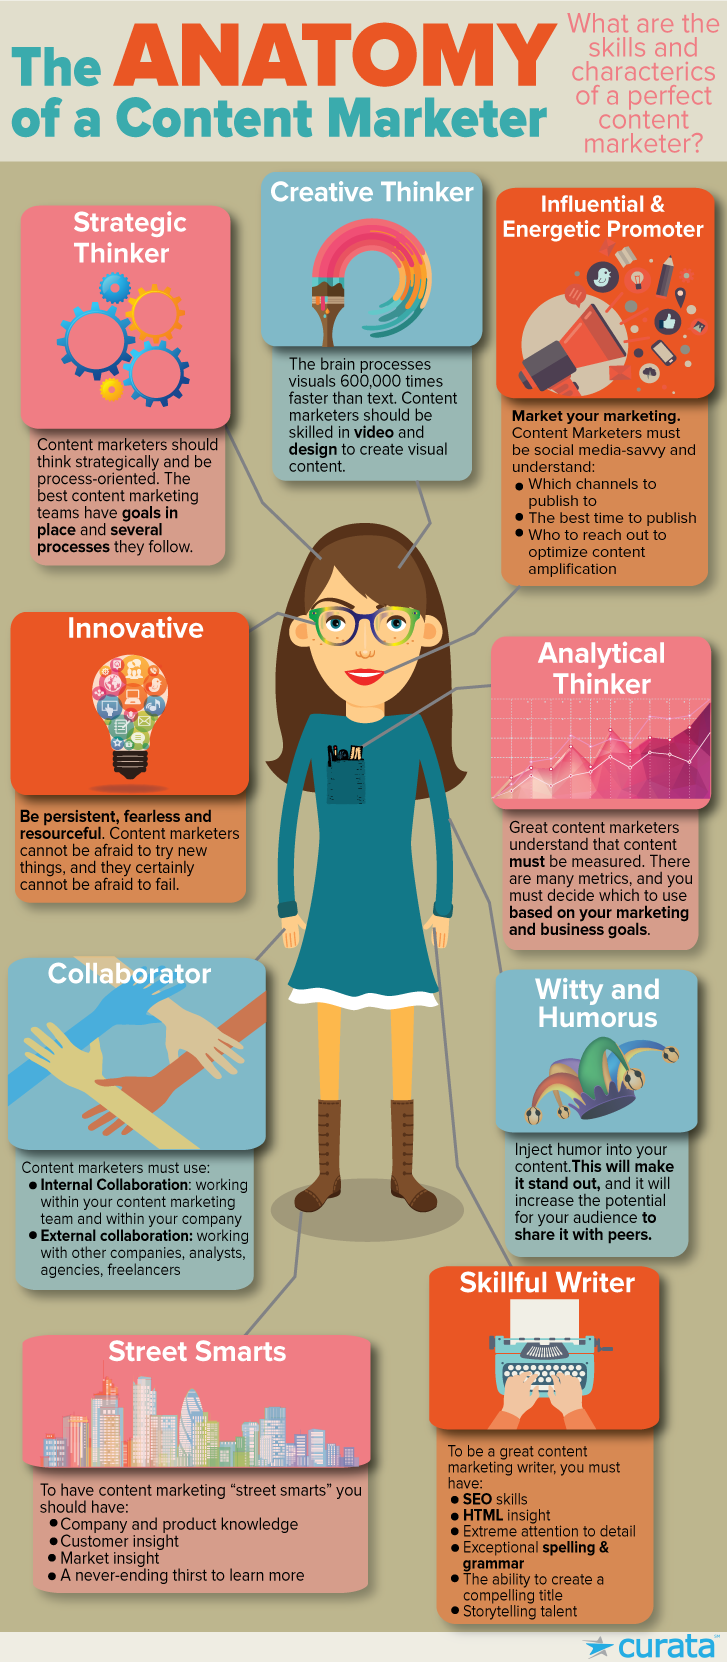 Anatomy of a content marketer